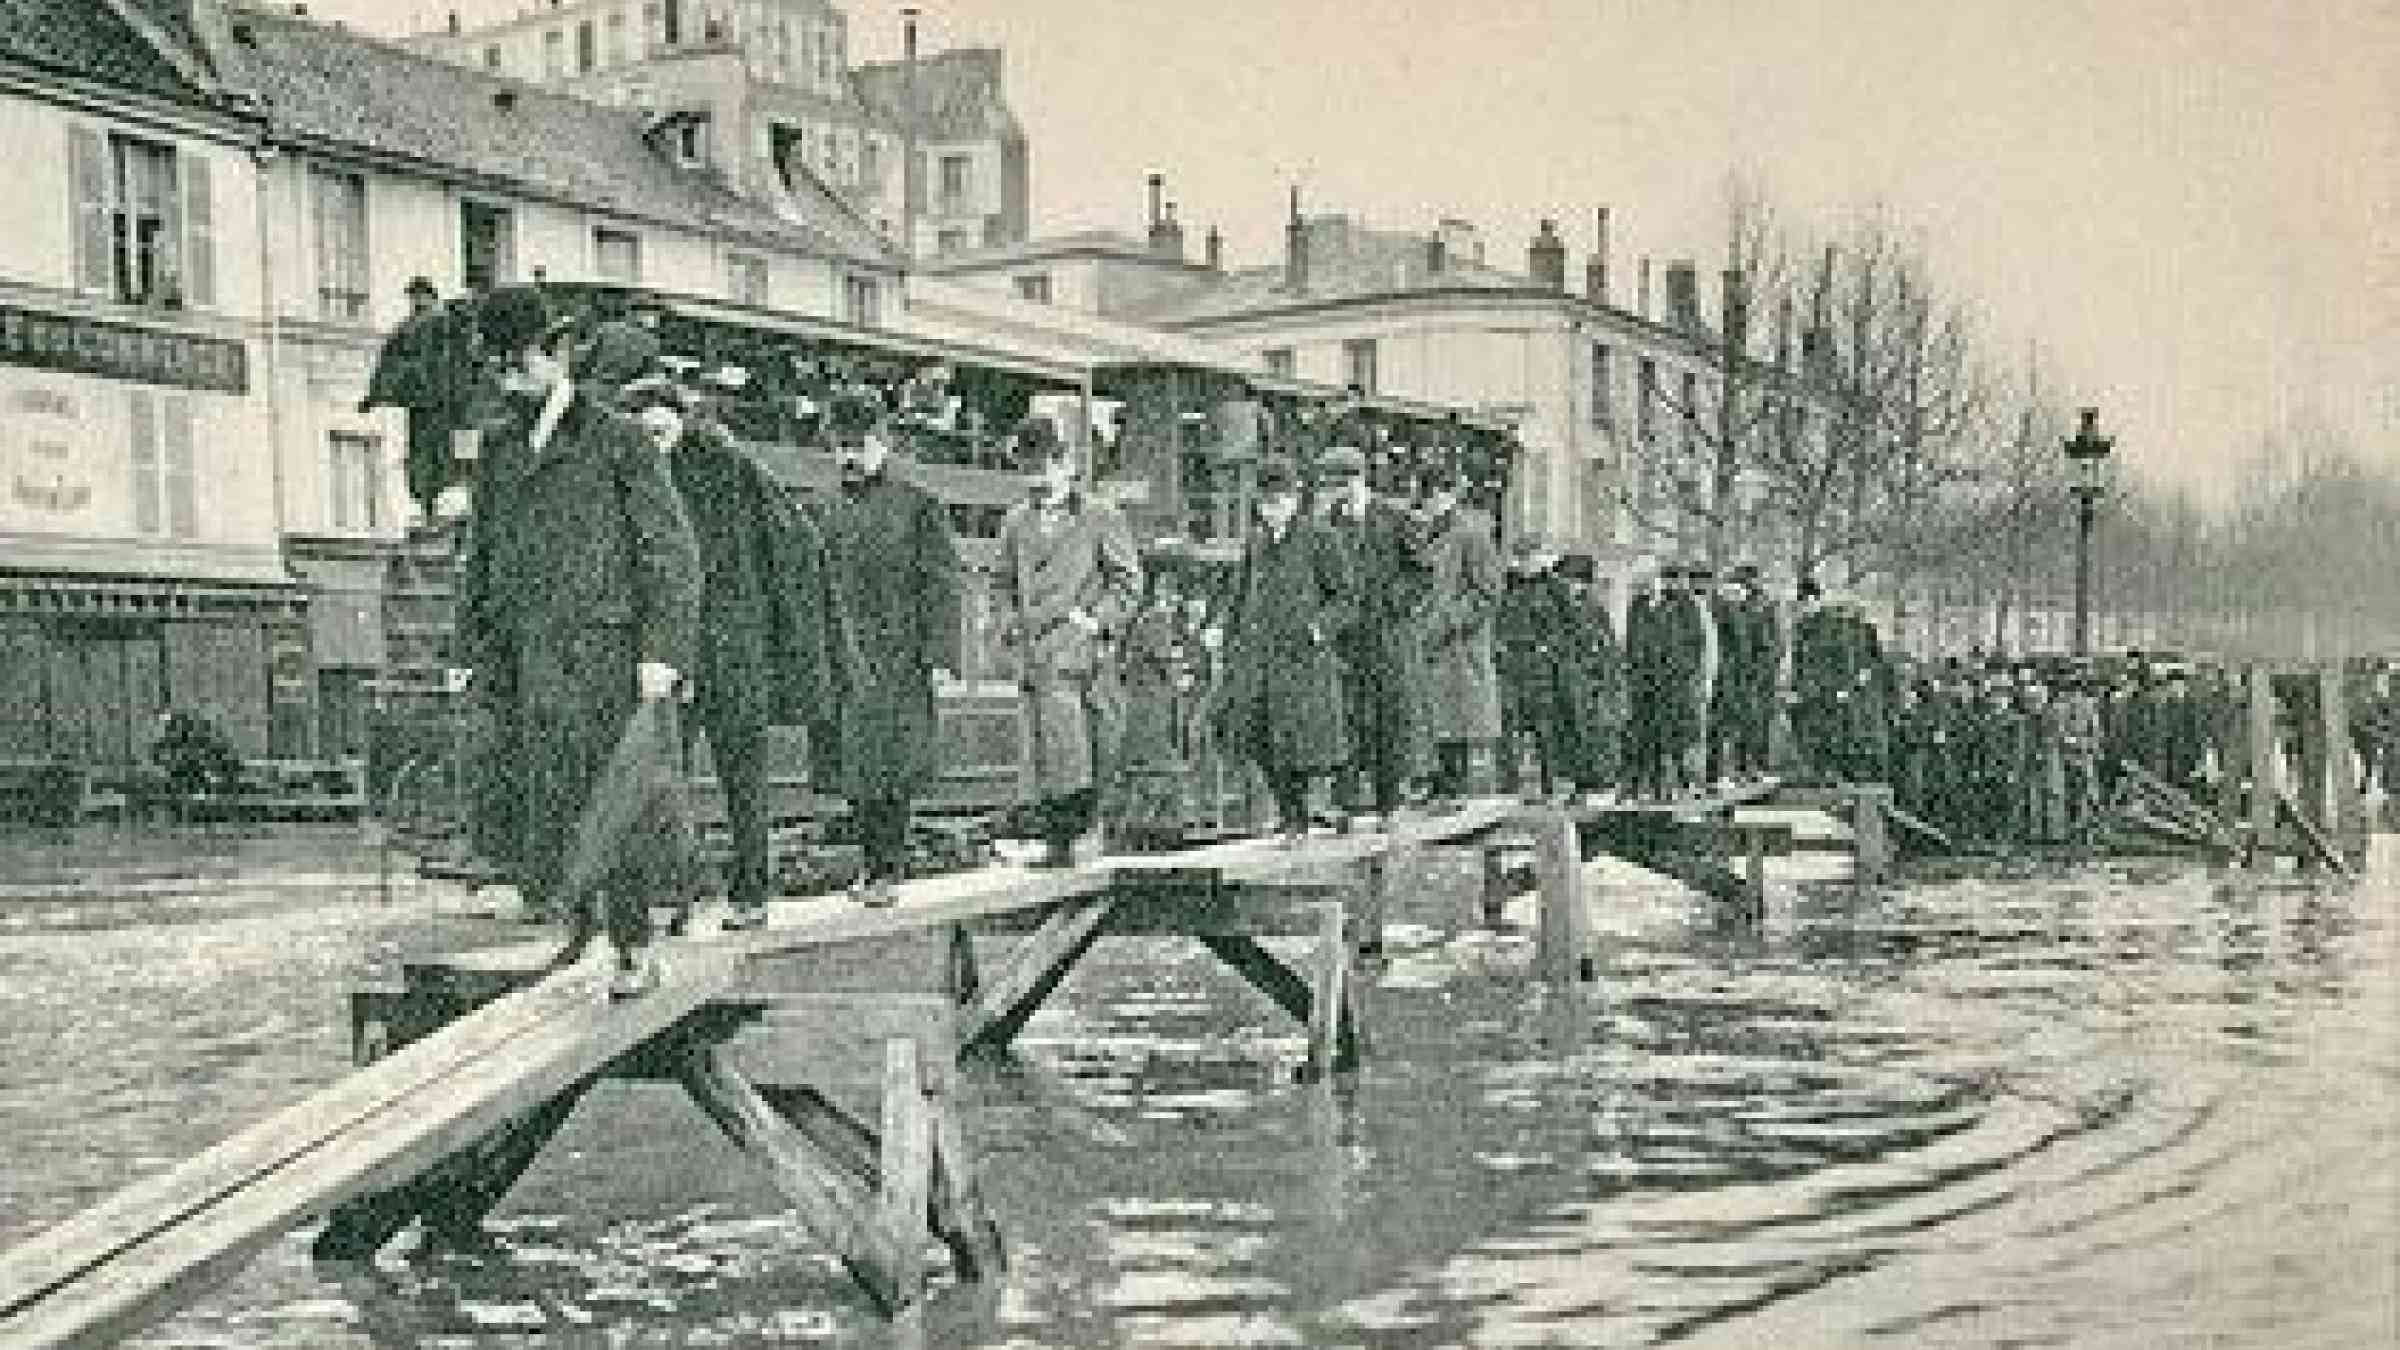 <b>Faded memory: </b>A repeat of the 1910 floods in Paris would now affect up to 5 million people and cause up to Euros 30 billion of damage.